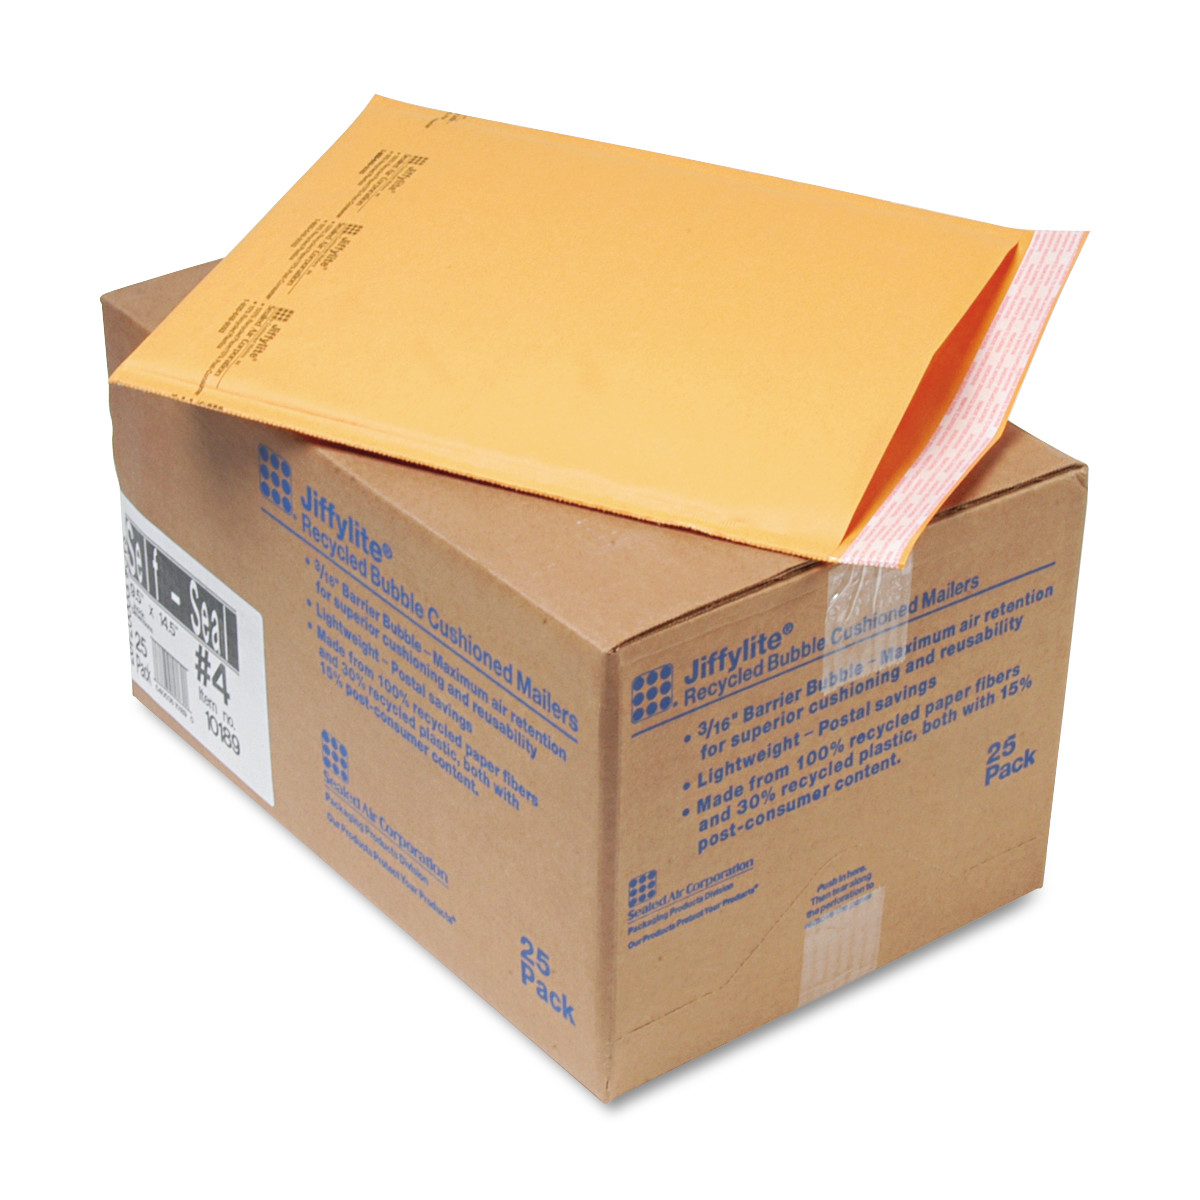 Sealed Air JiffyLite Cellular Cushioned Mailers - Bubble - #4 - 9 1/2" Width x 14 1/2" Length - Peel & Seal - Kraft - 25 / Carto